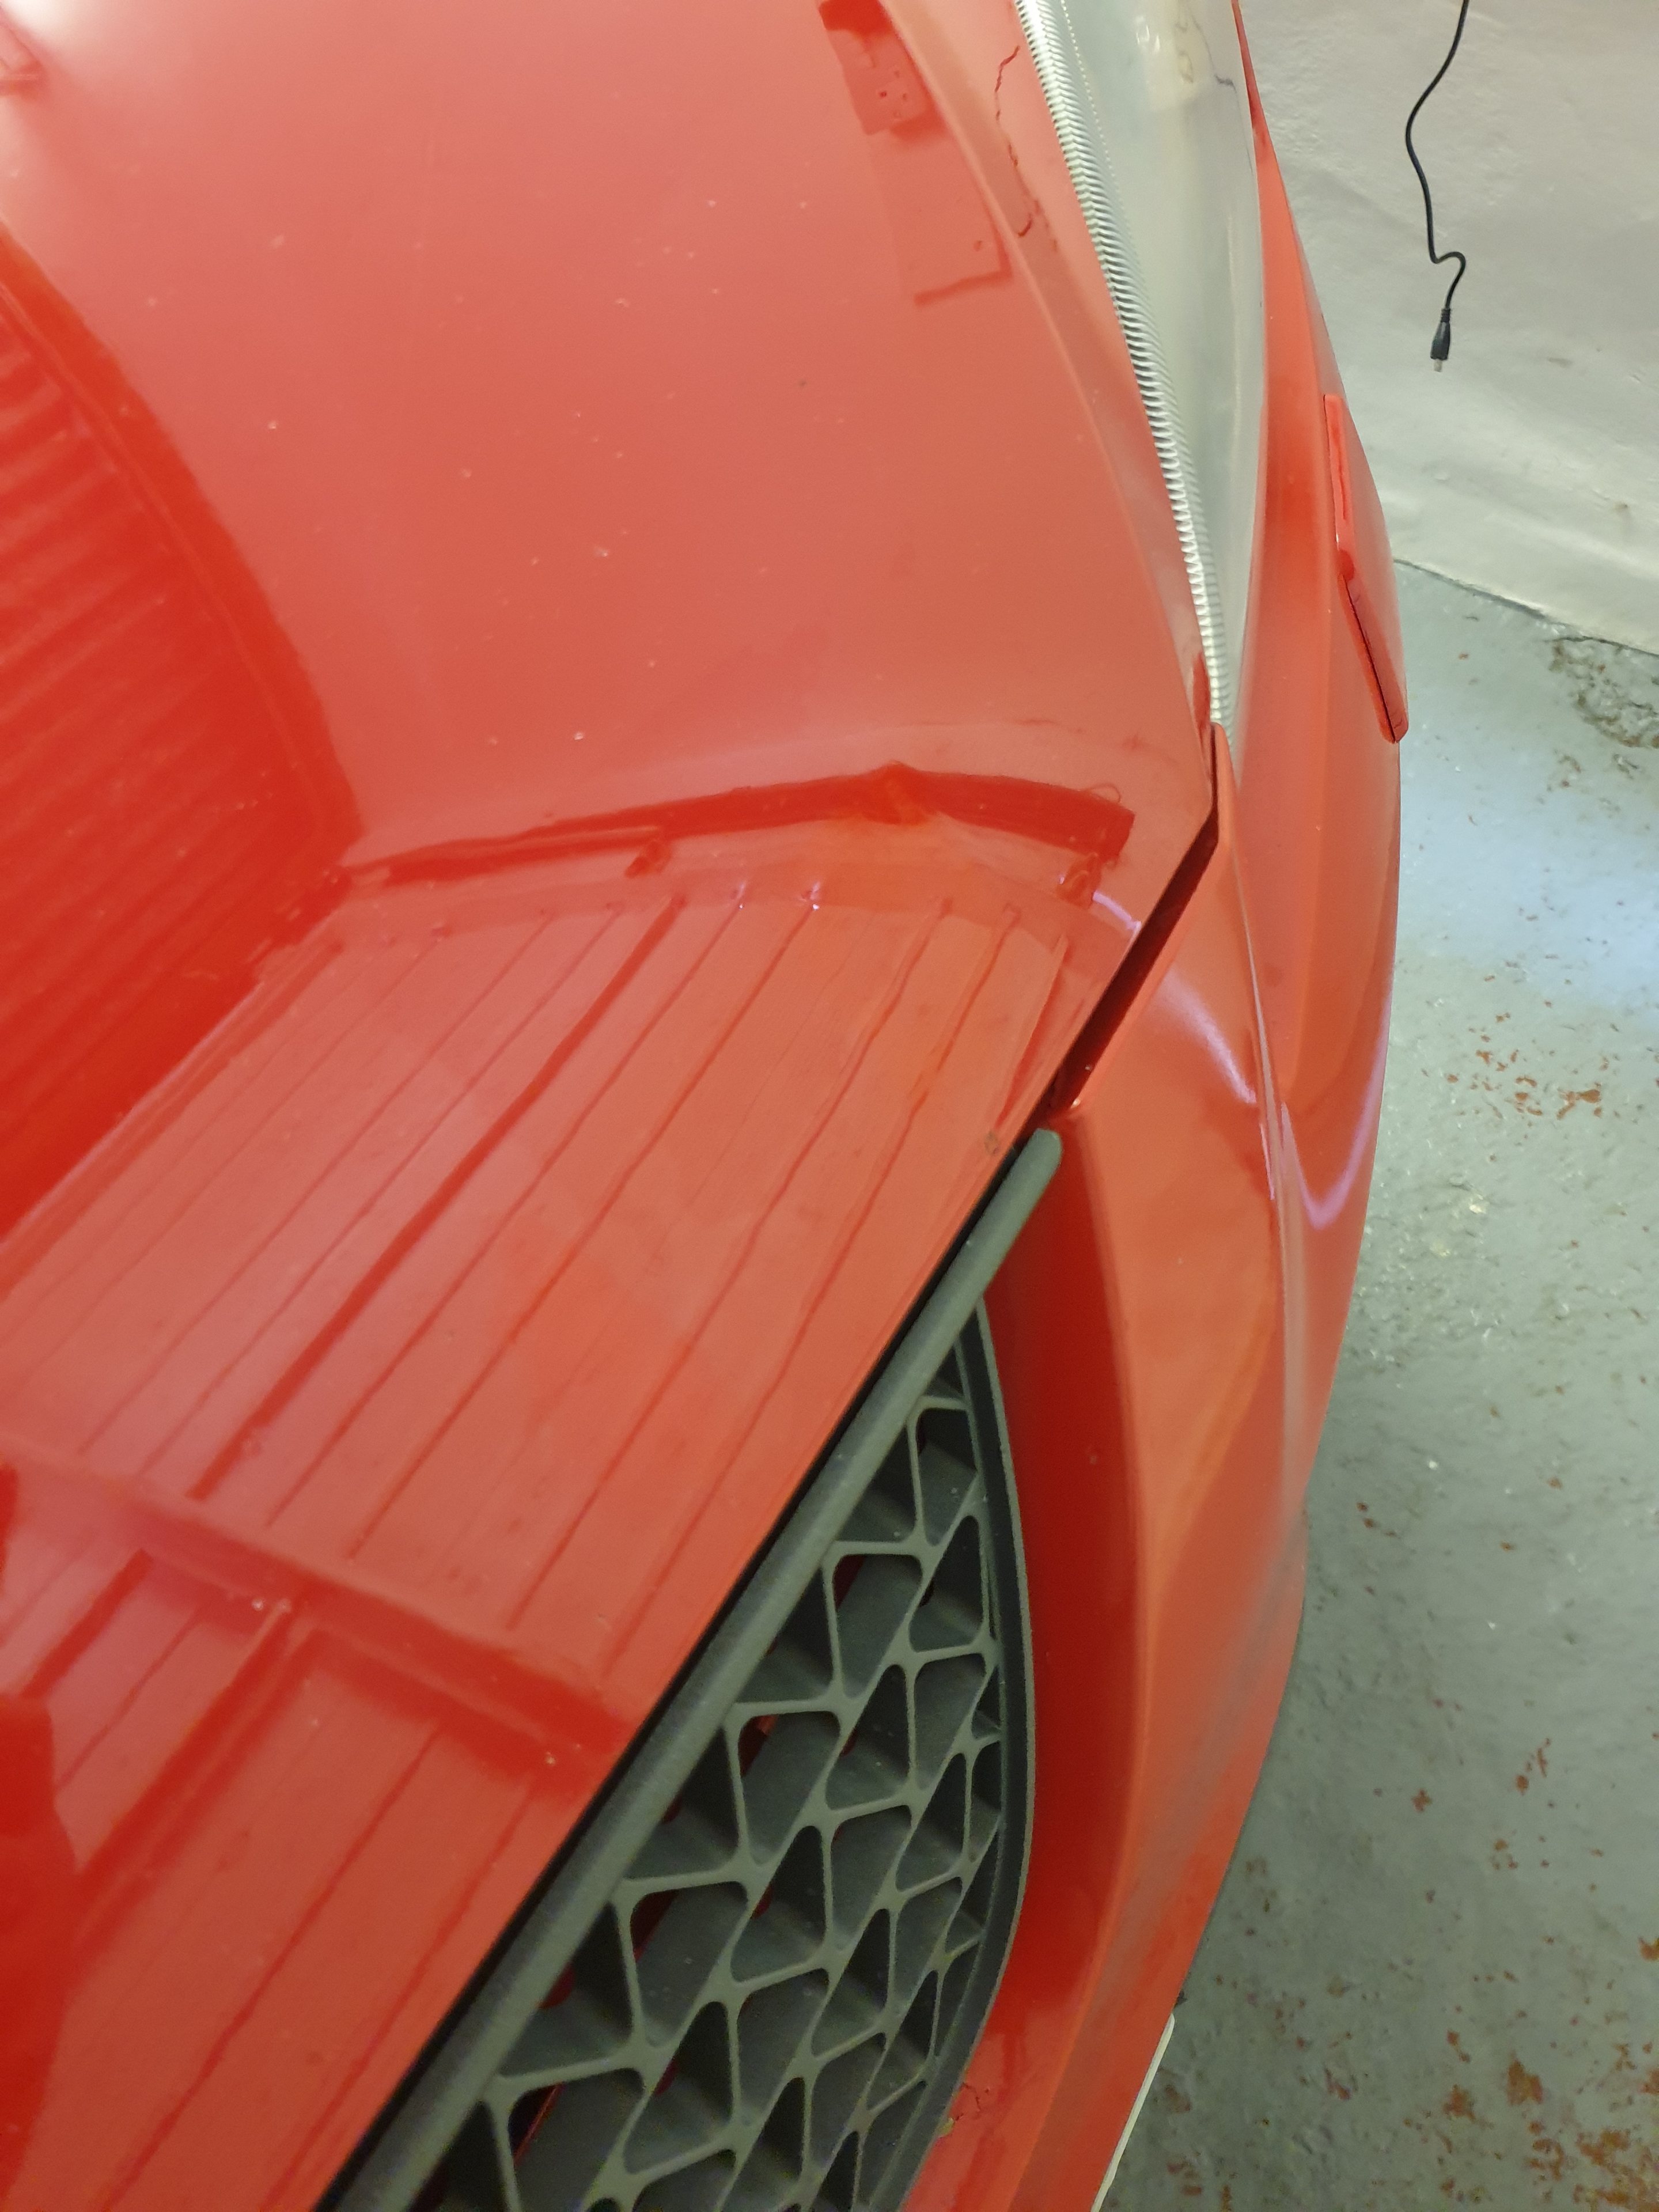 Clearcoat Problem - Page 1 - Bodywork & Detailing - PistonHeads